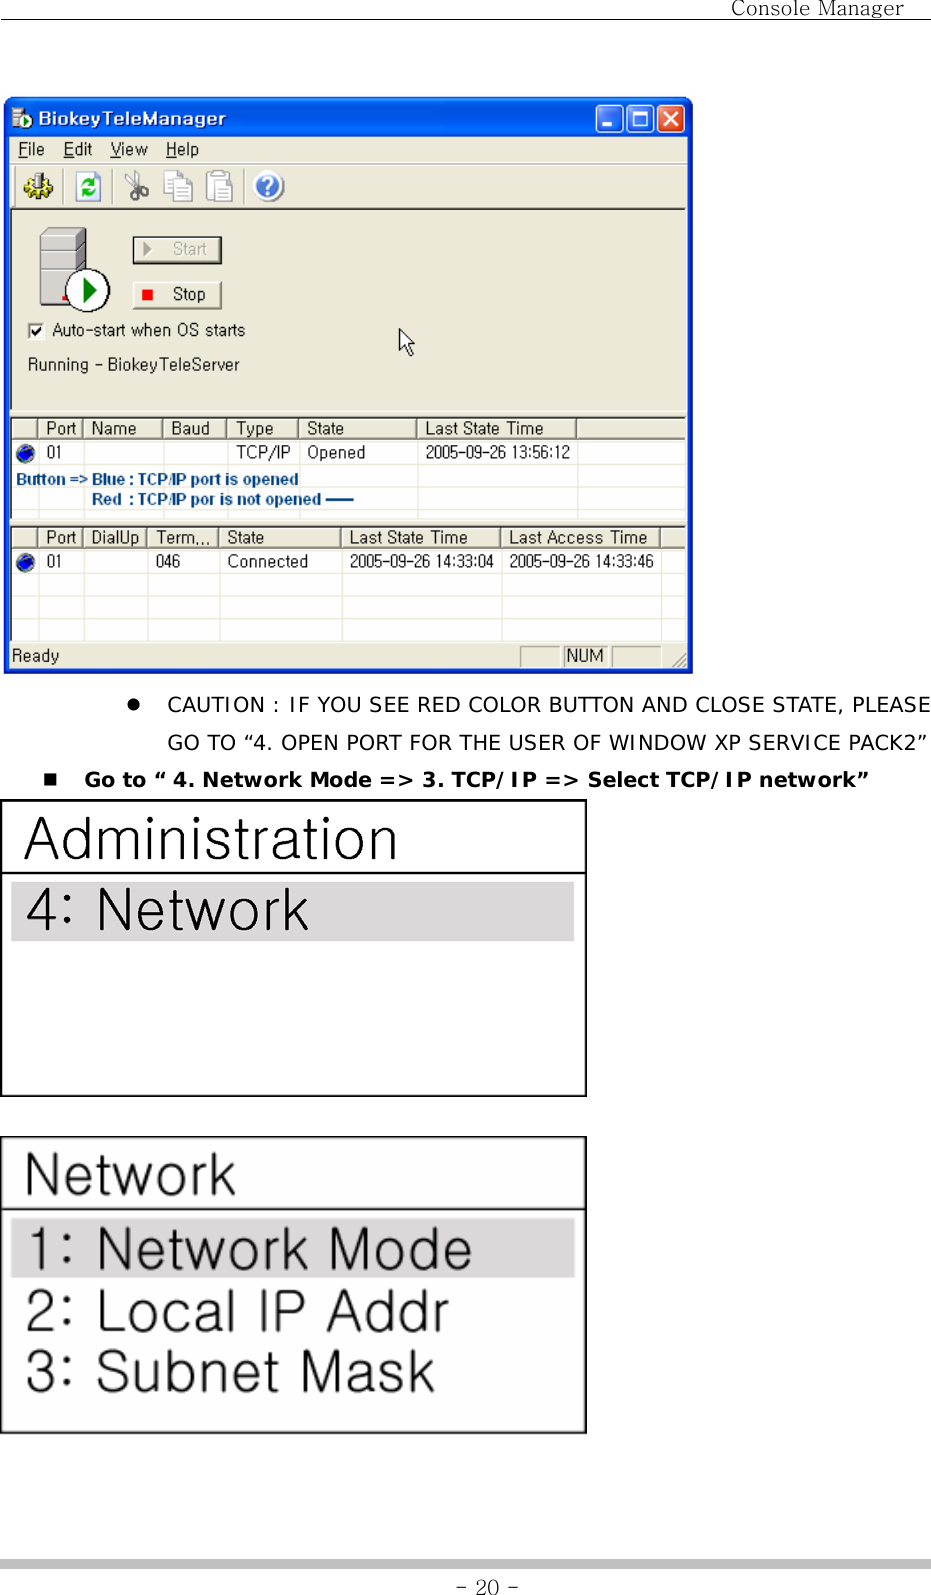                                Console Manager               - 20 - z CAUTION : IF YOU SEE RED COLOR BUTTON AND CLOSE STATE, PLEASE GO TO “4. OPEN PORT FOR THE USER OF WINDOW XP SERVICE PACK2”  Go to “ 4. Network Mode =&gt; 3. TCP/IP =&gt; Select TCP/IP network”    